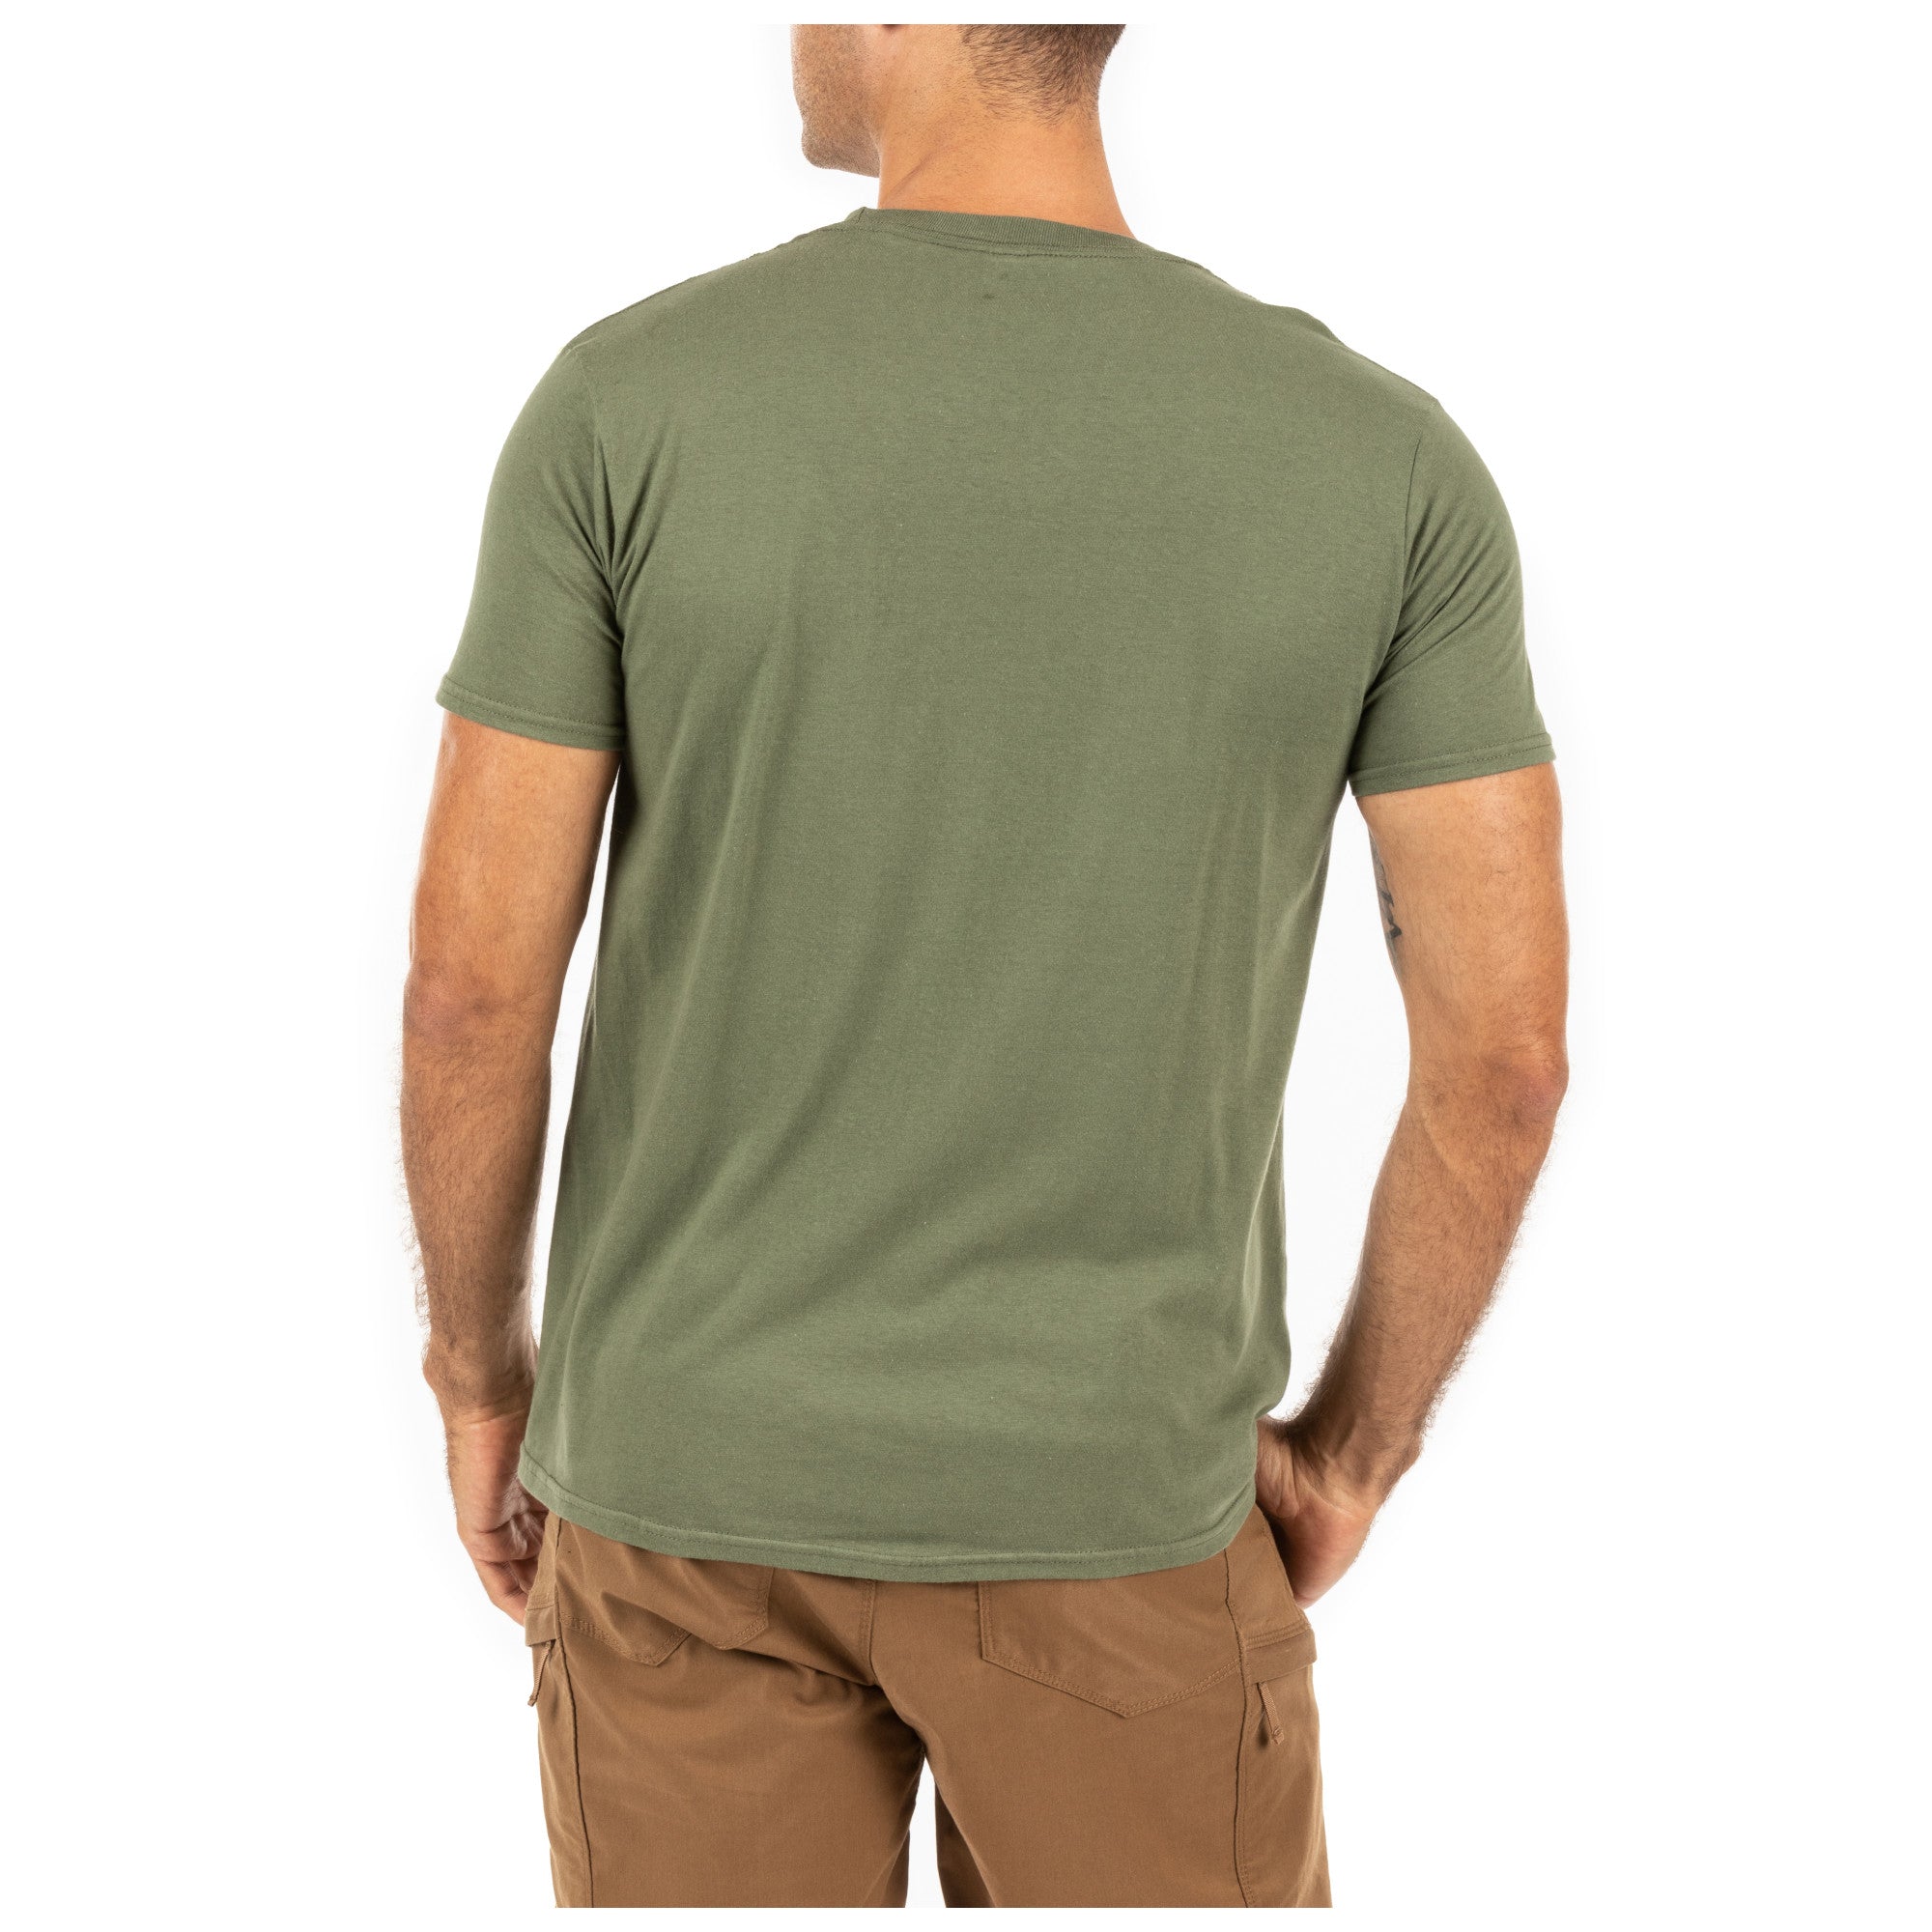 5.11 Tactical Sticks And Stones Tee Military Green Tees & Tanks 5.11 Tactical Small Tactical Gear Supplier Tactical Distributors Australia